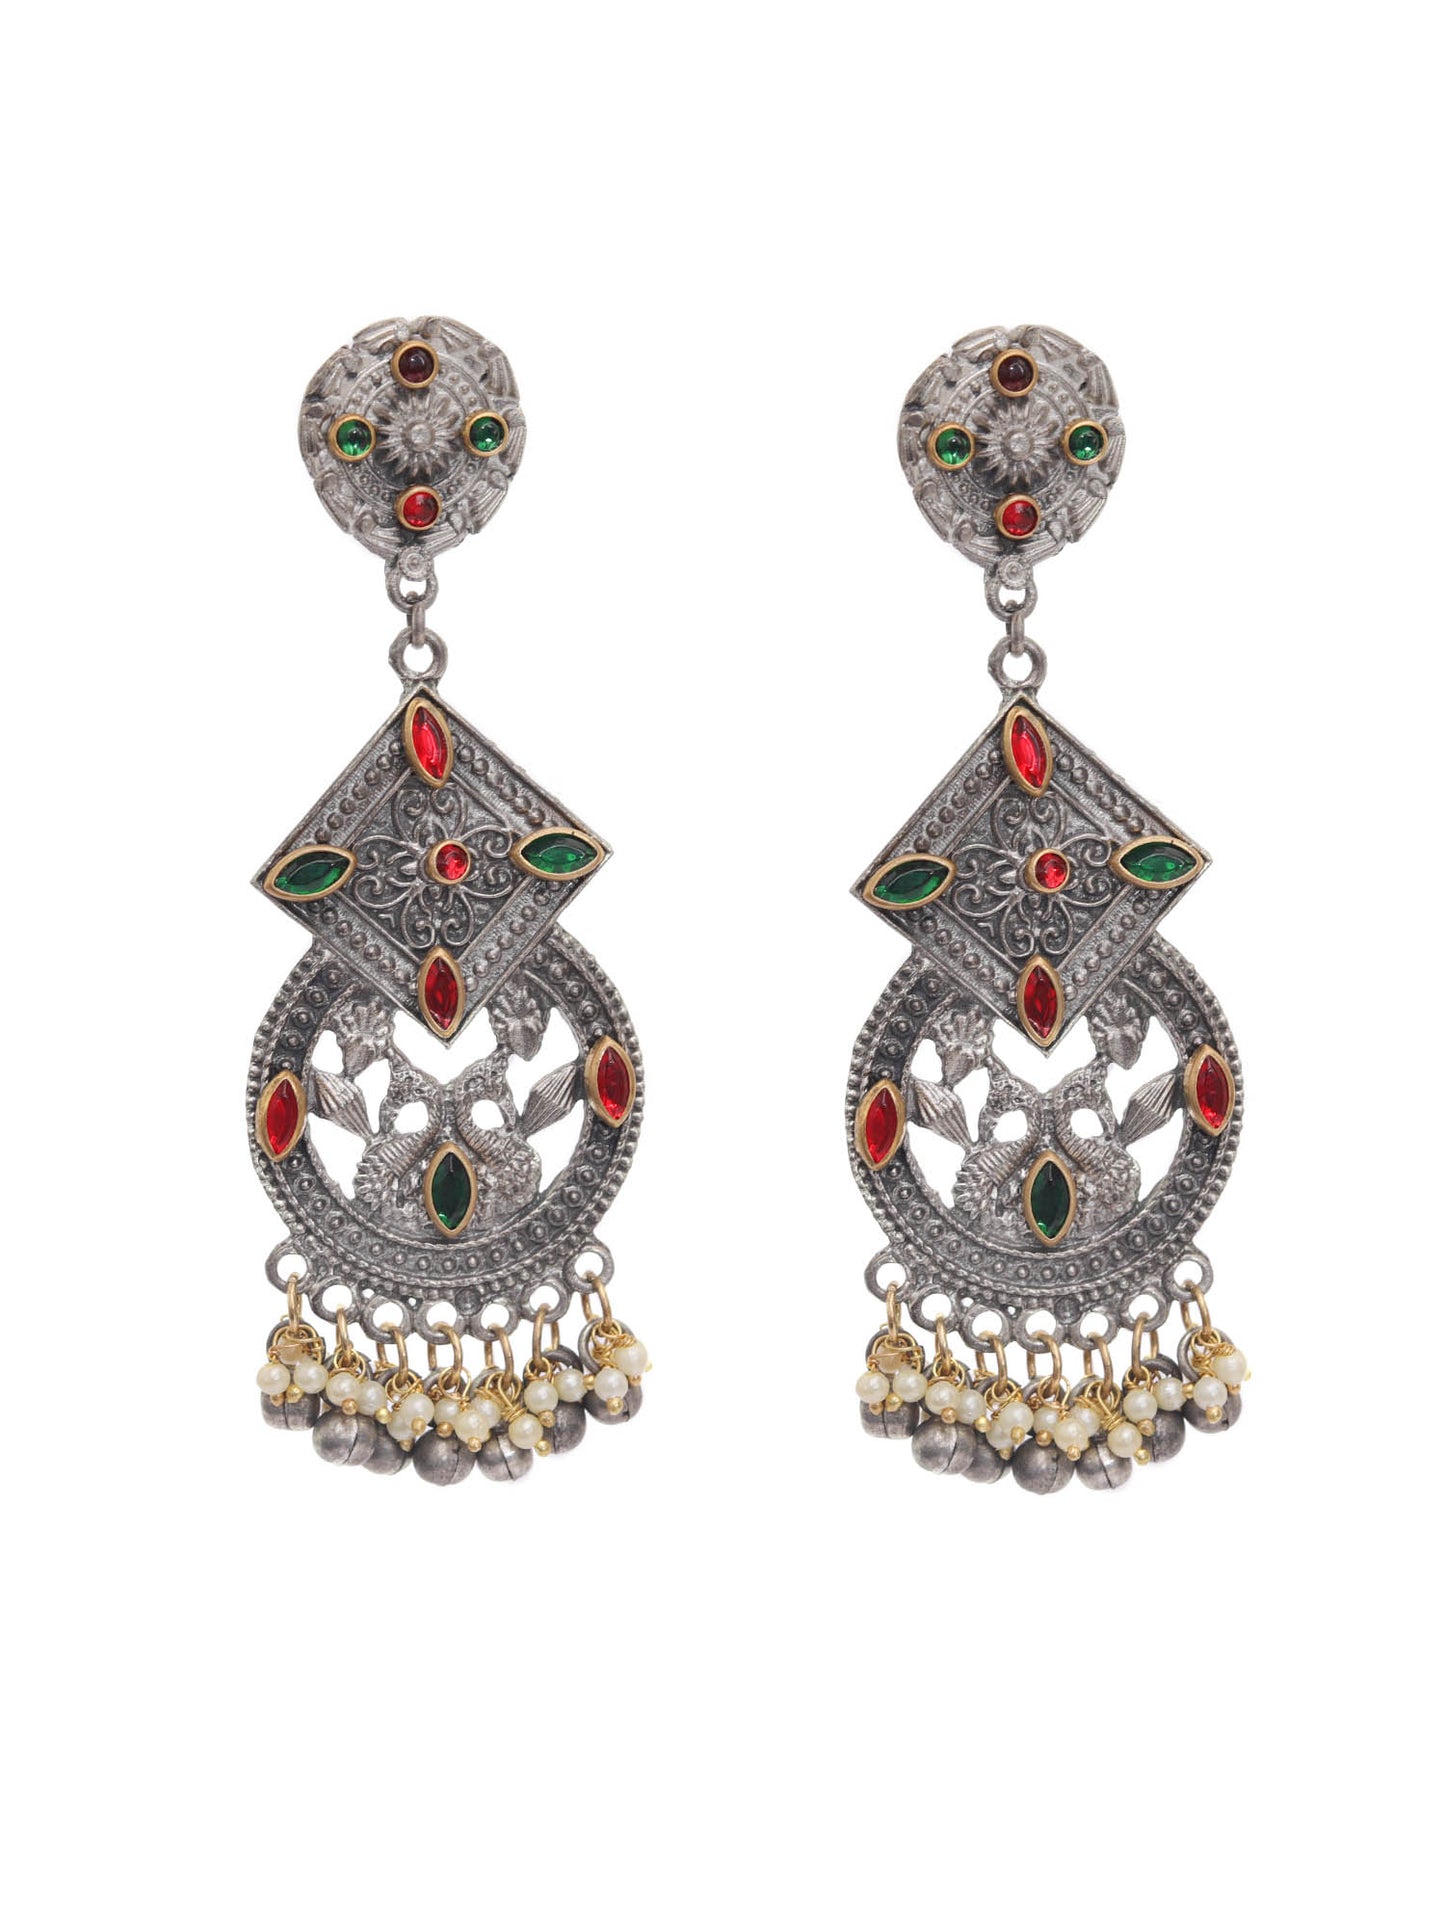 The Red & Green Stone Queensly Duck Earrings